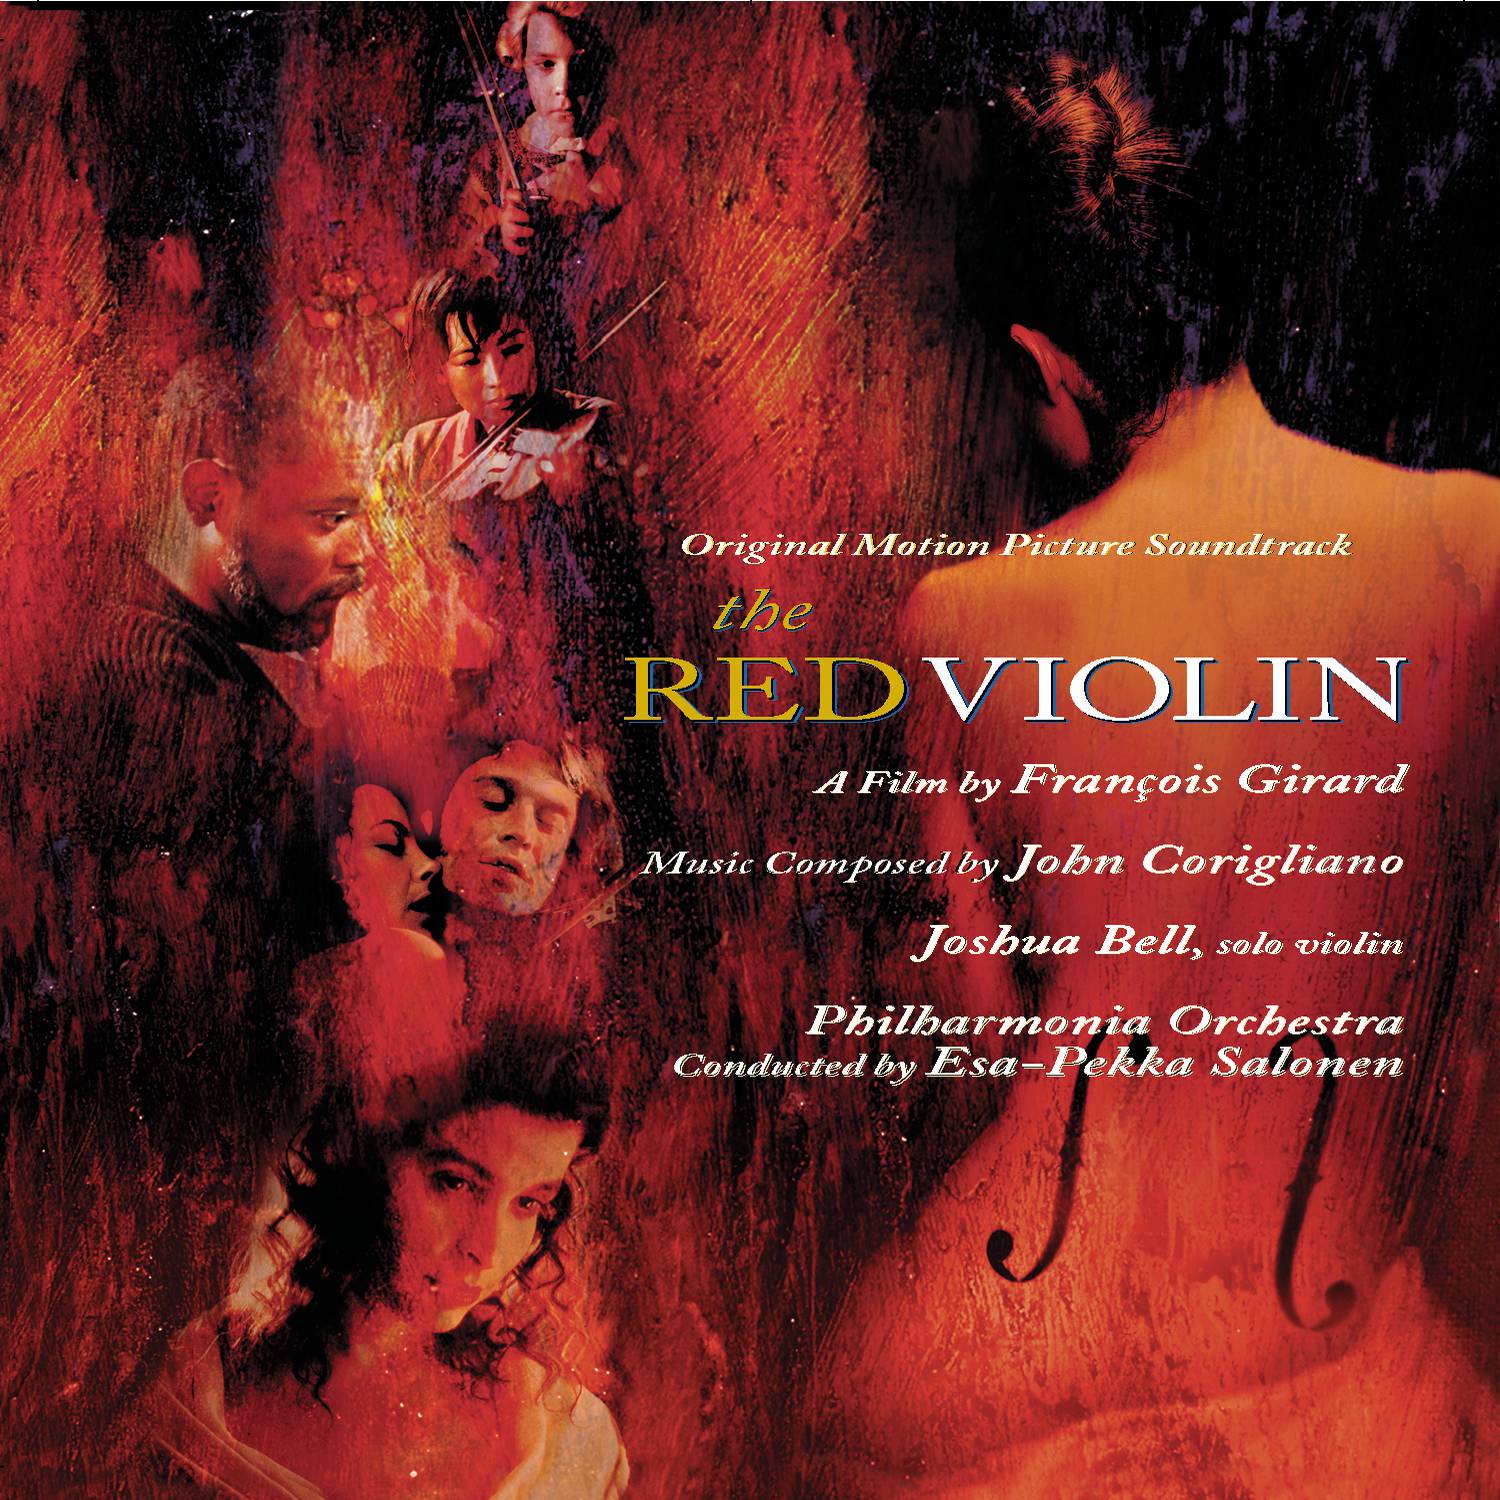 The Red Violin - Music from the Motion Picture